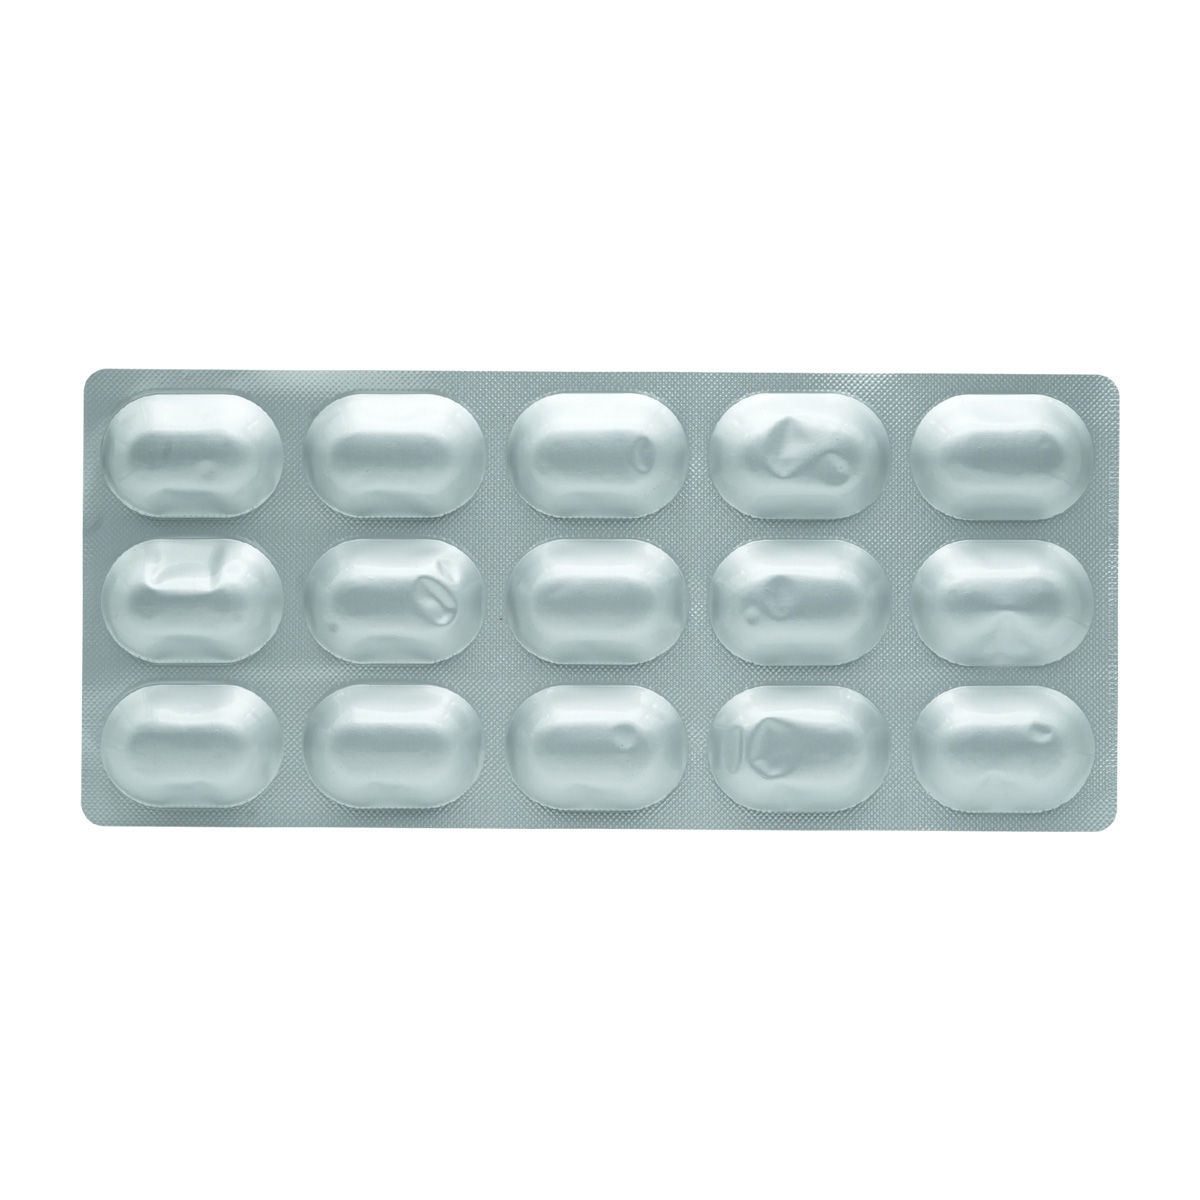 Sitaxa M 50/1000 mg Tablet 15's, Pack of 15 TabletS